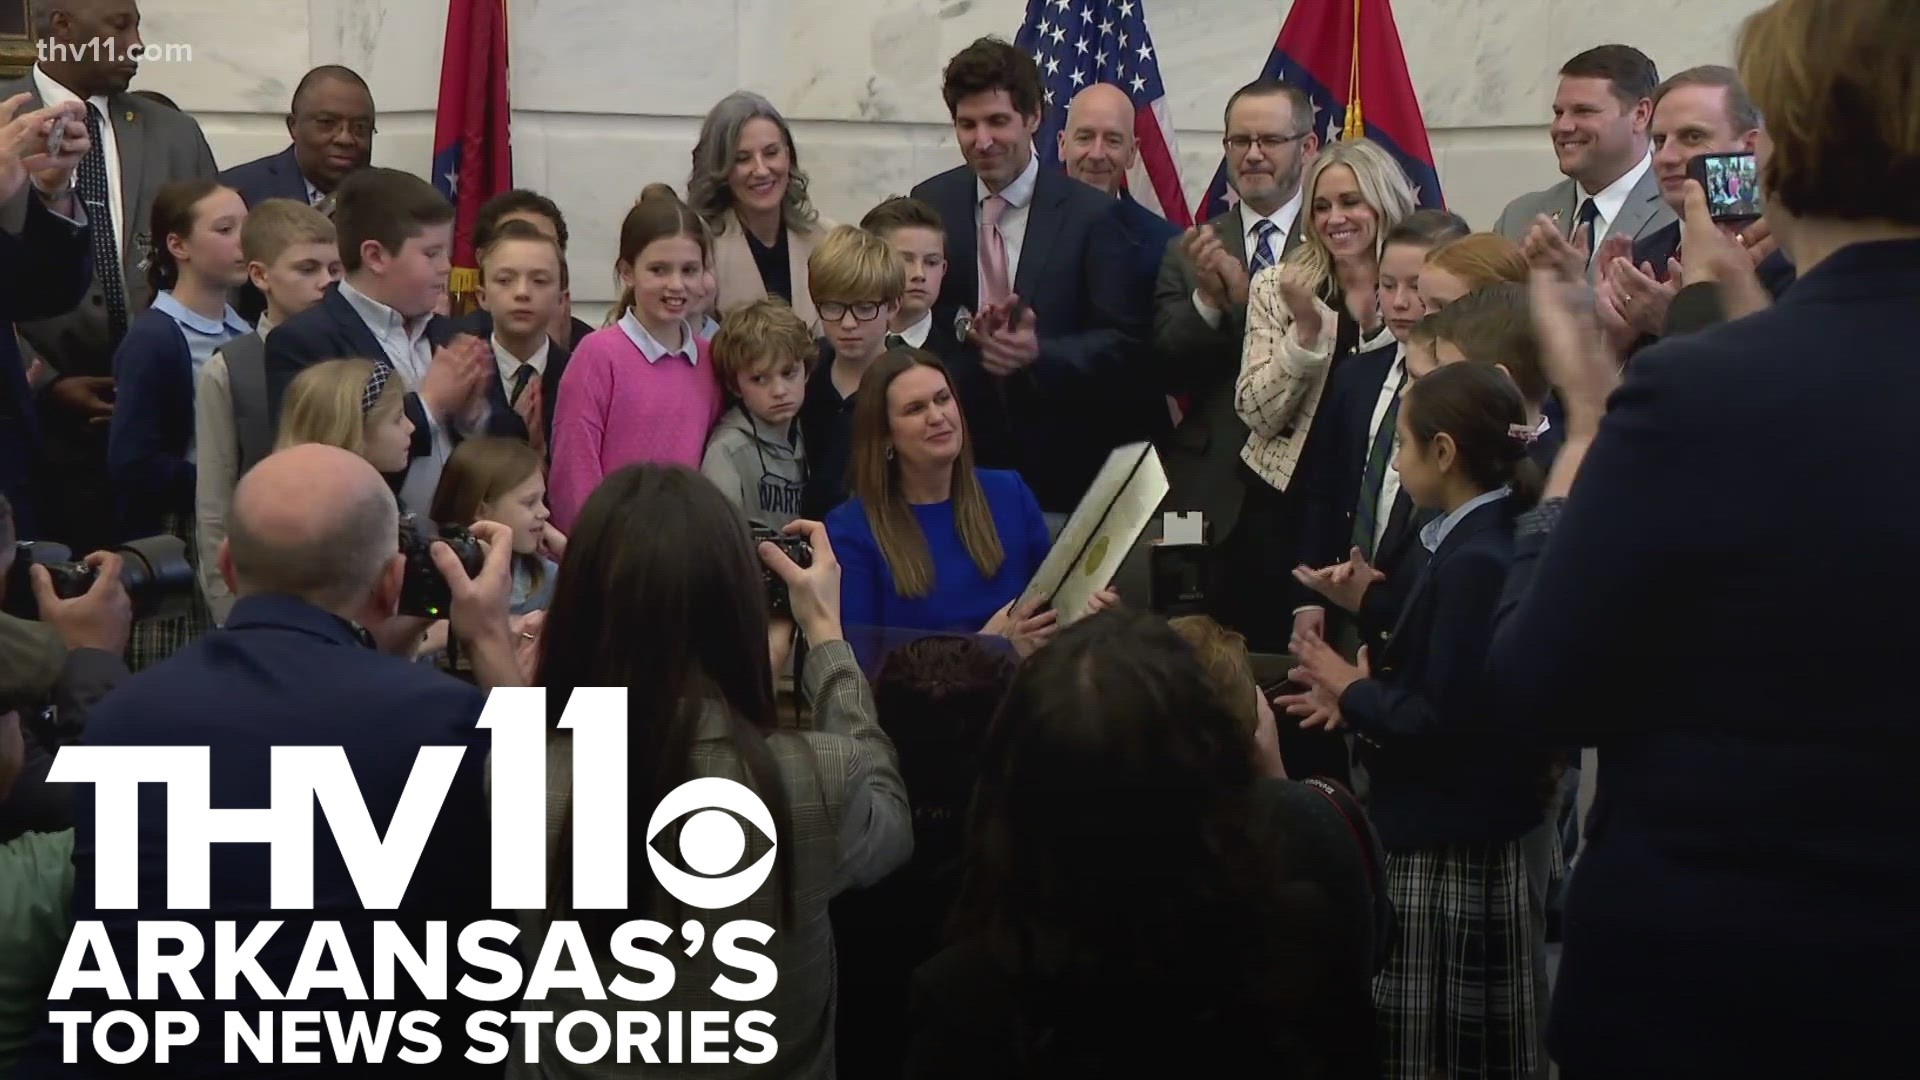 Sarah Horbacewicz delivers Arkansas's top news stories for March 12, 2023, including some of the things discussed after a busy week at the state capitol.